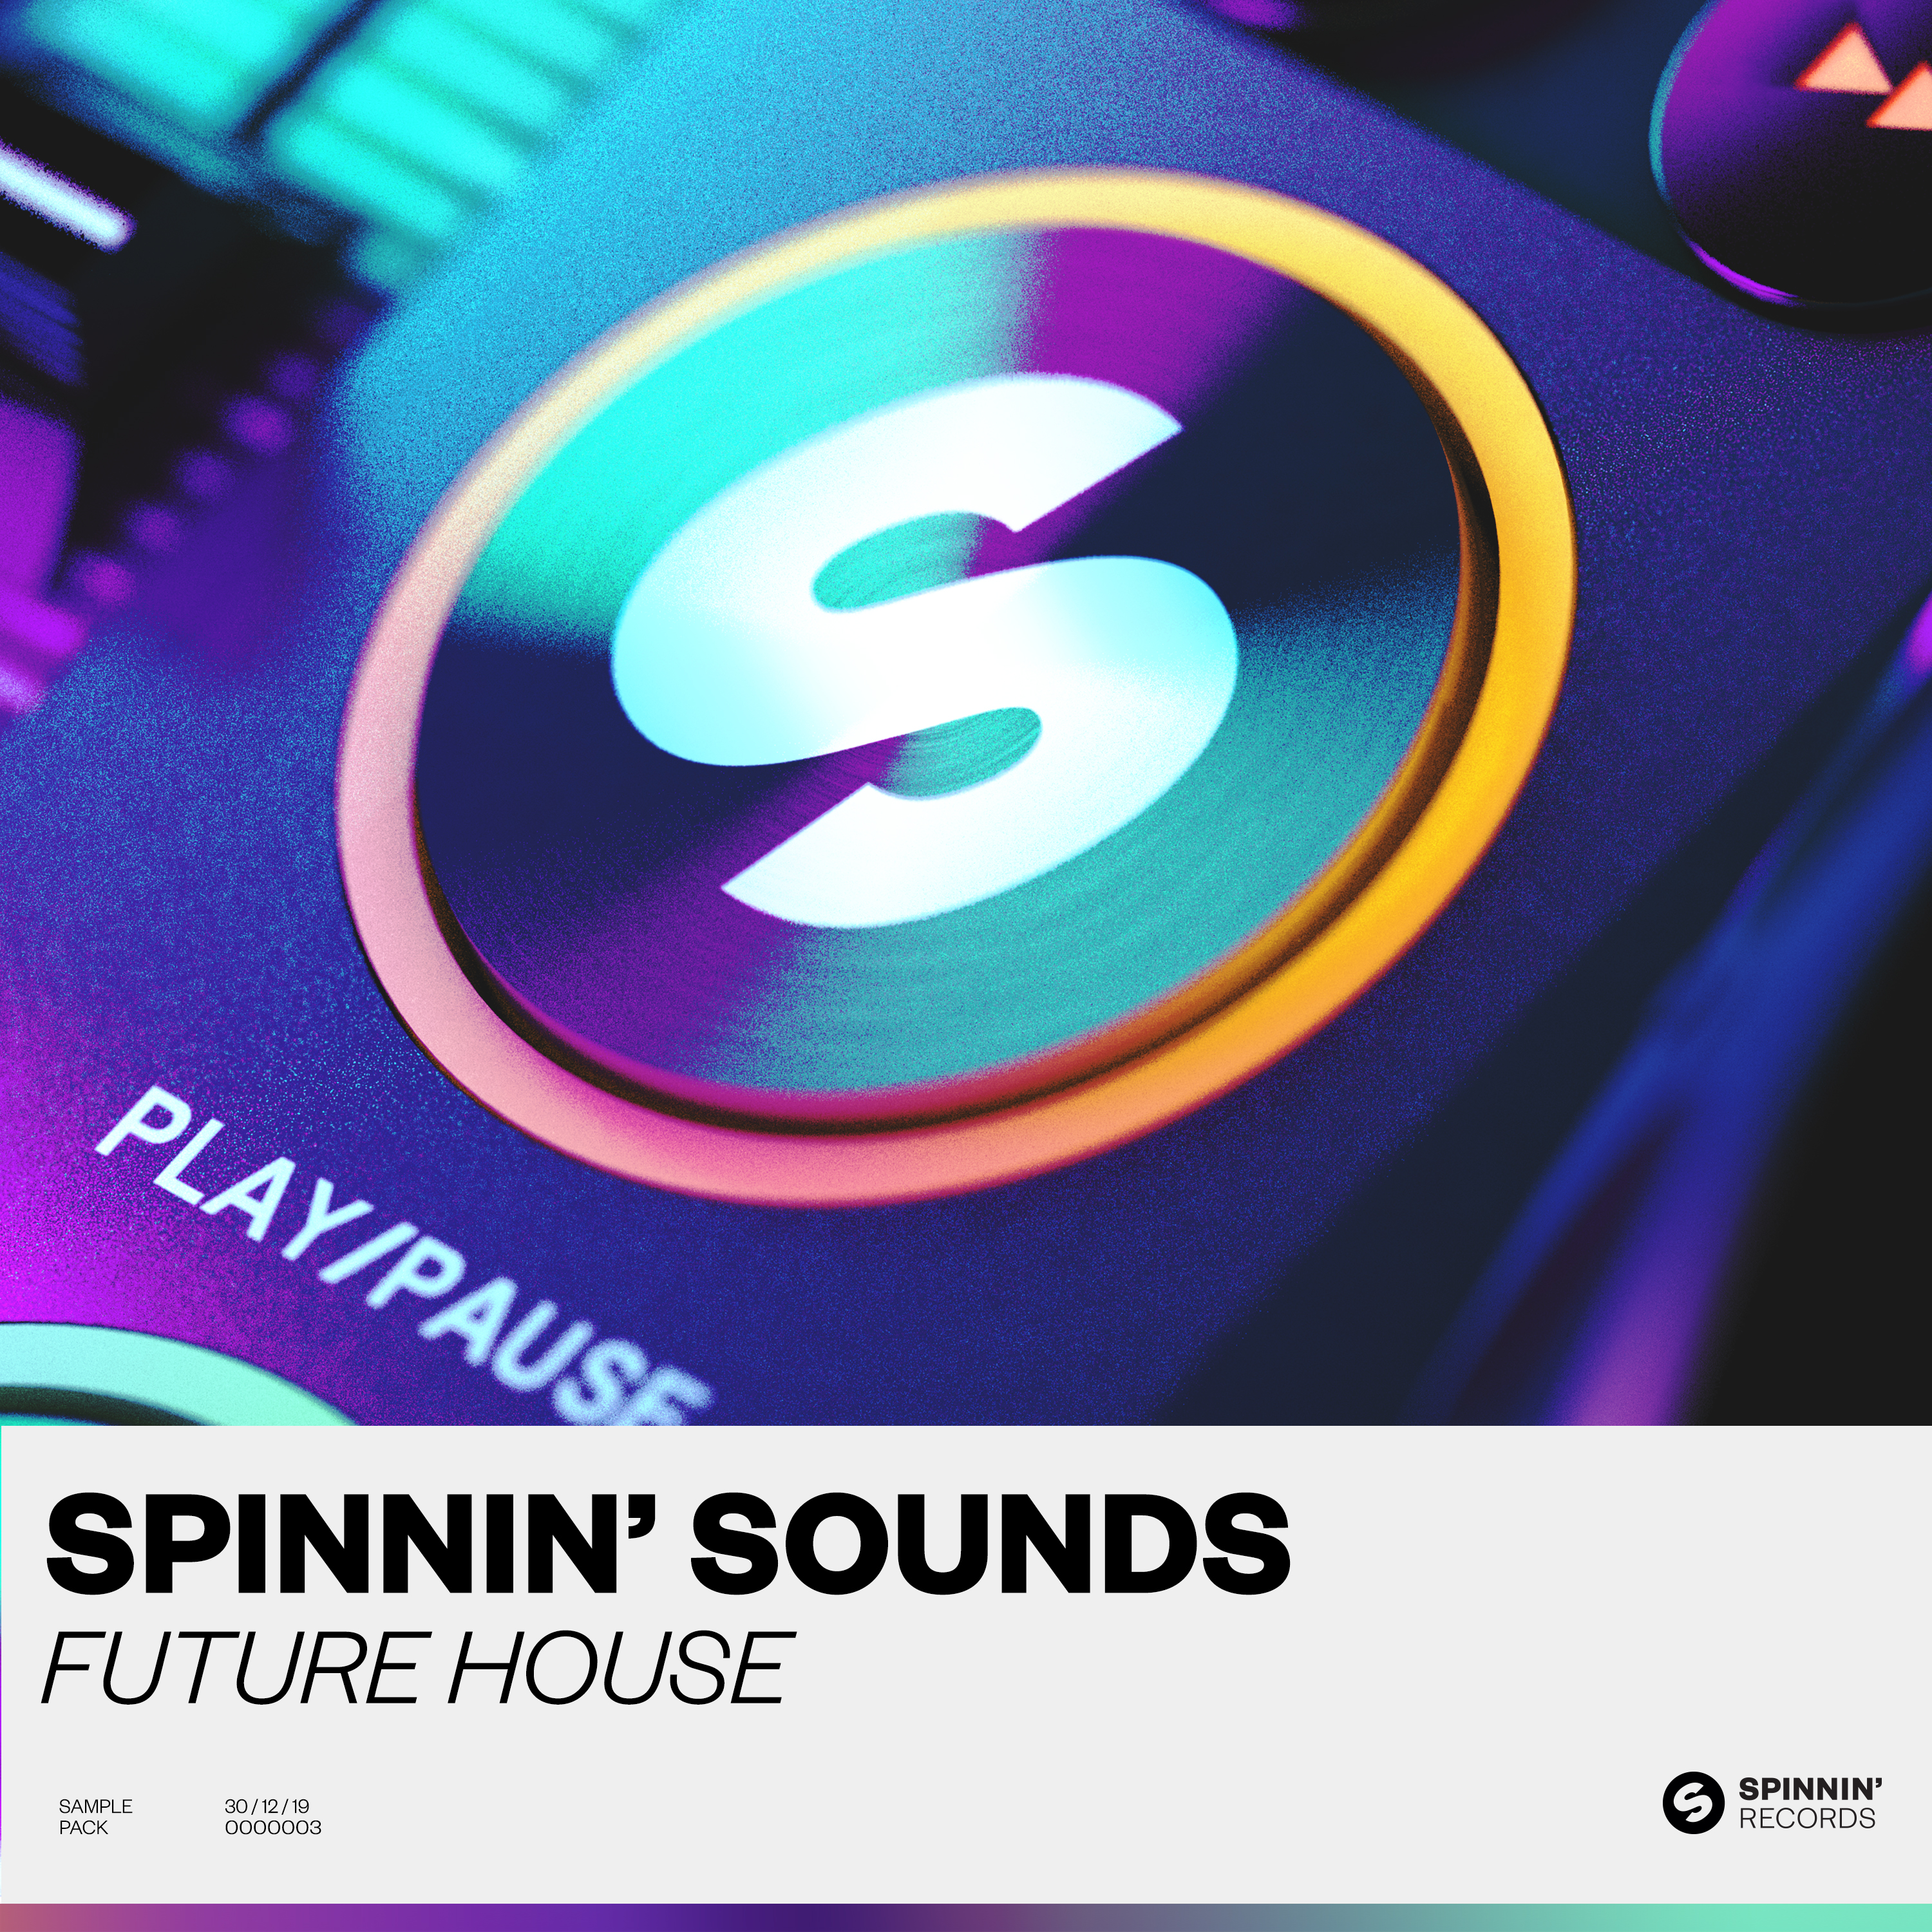 Spinnin' Sounds x Splice presents its third sample pack: Future House!, News